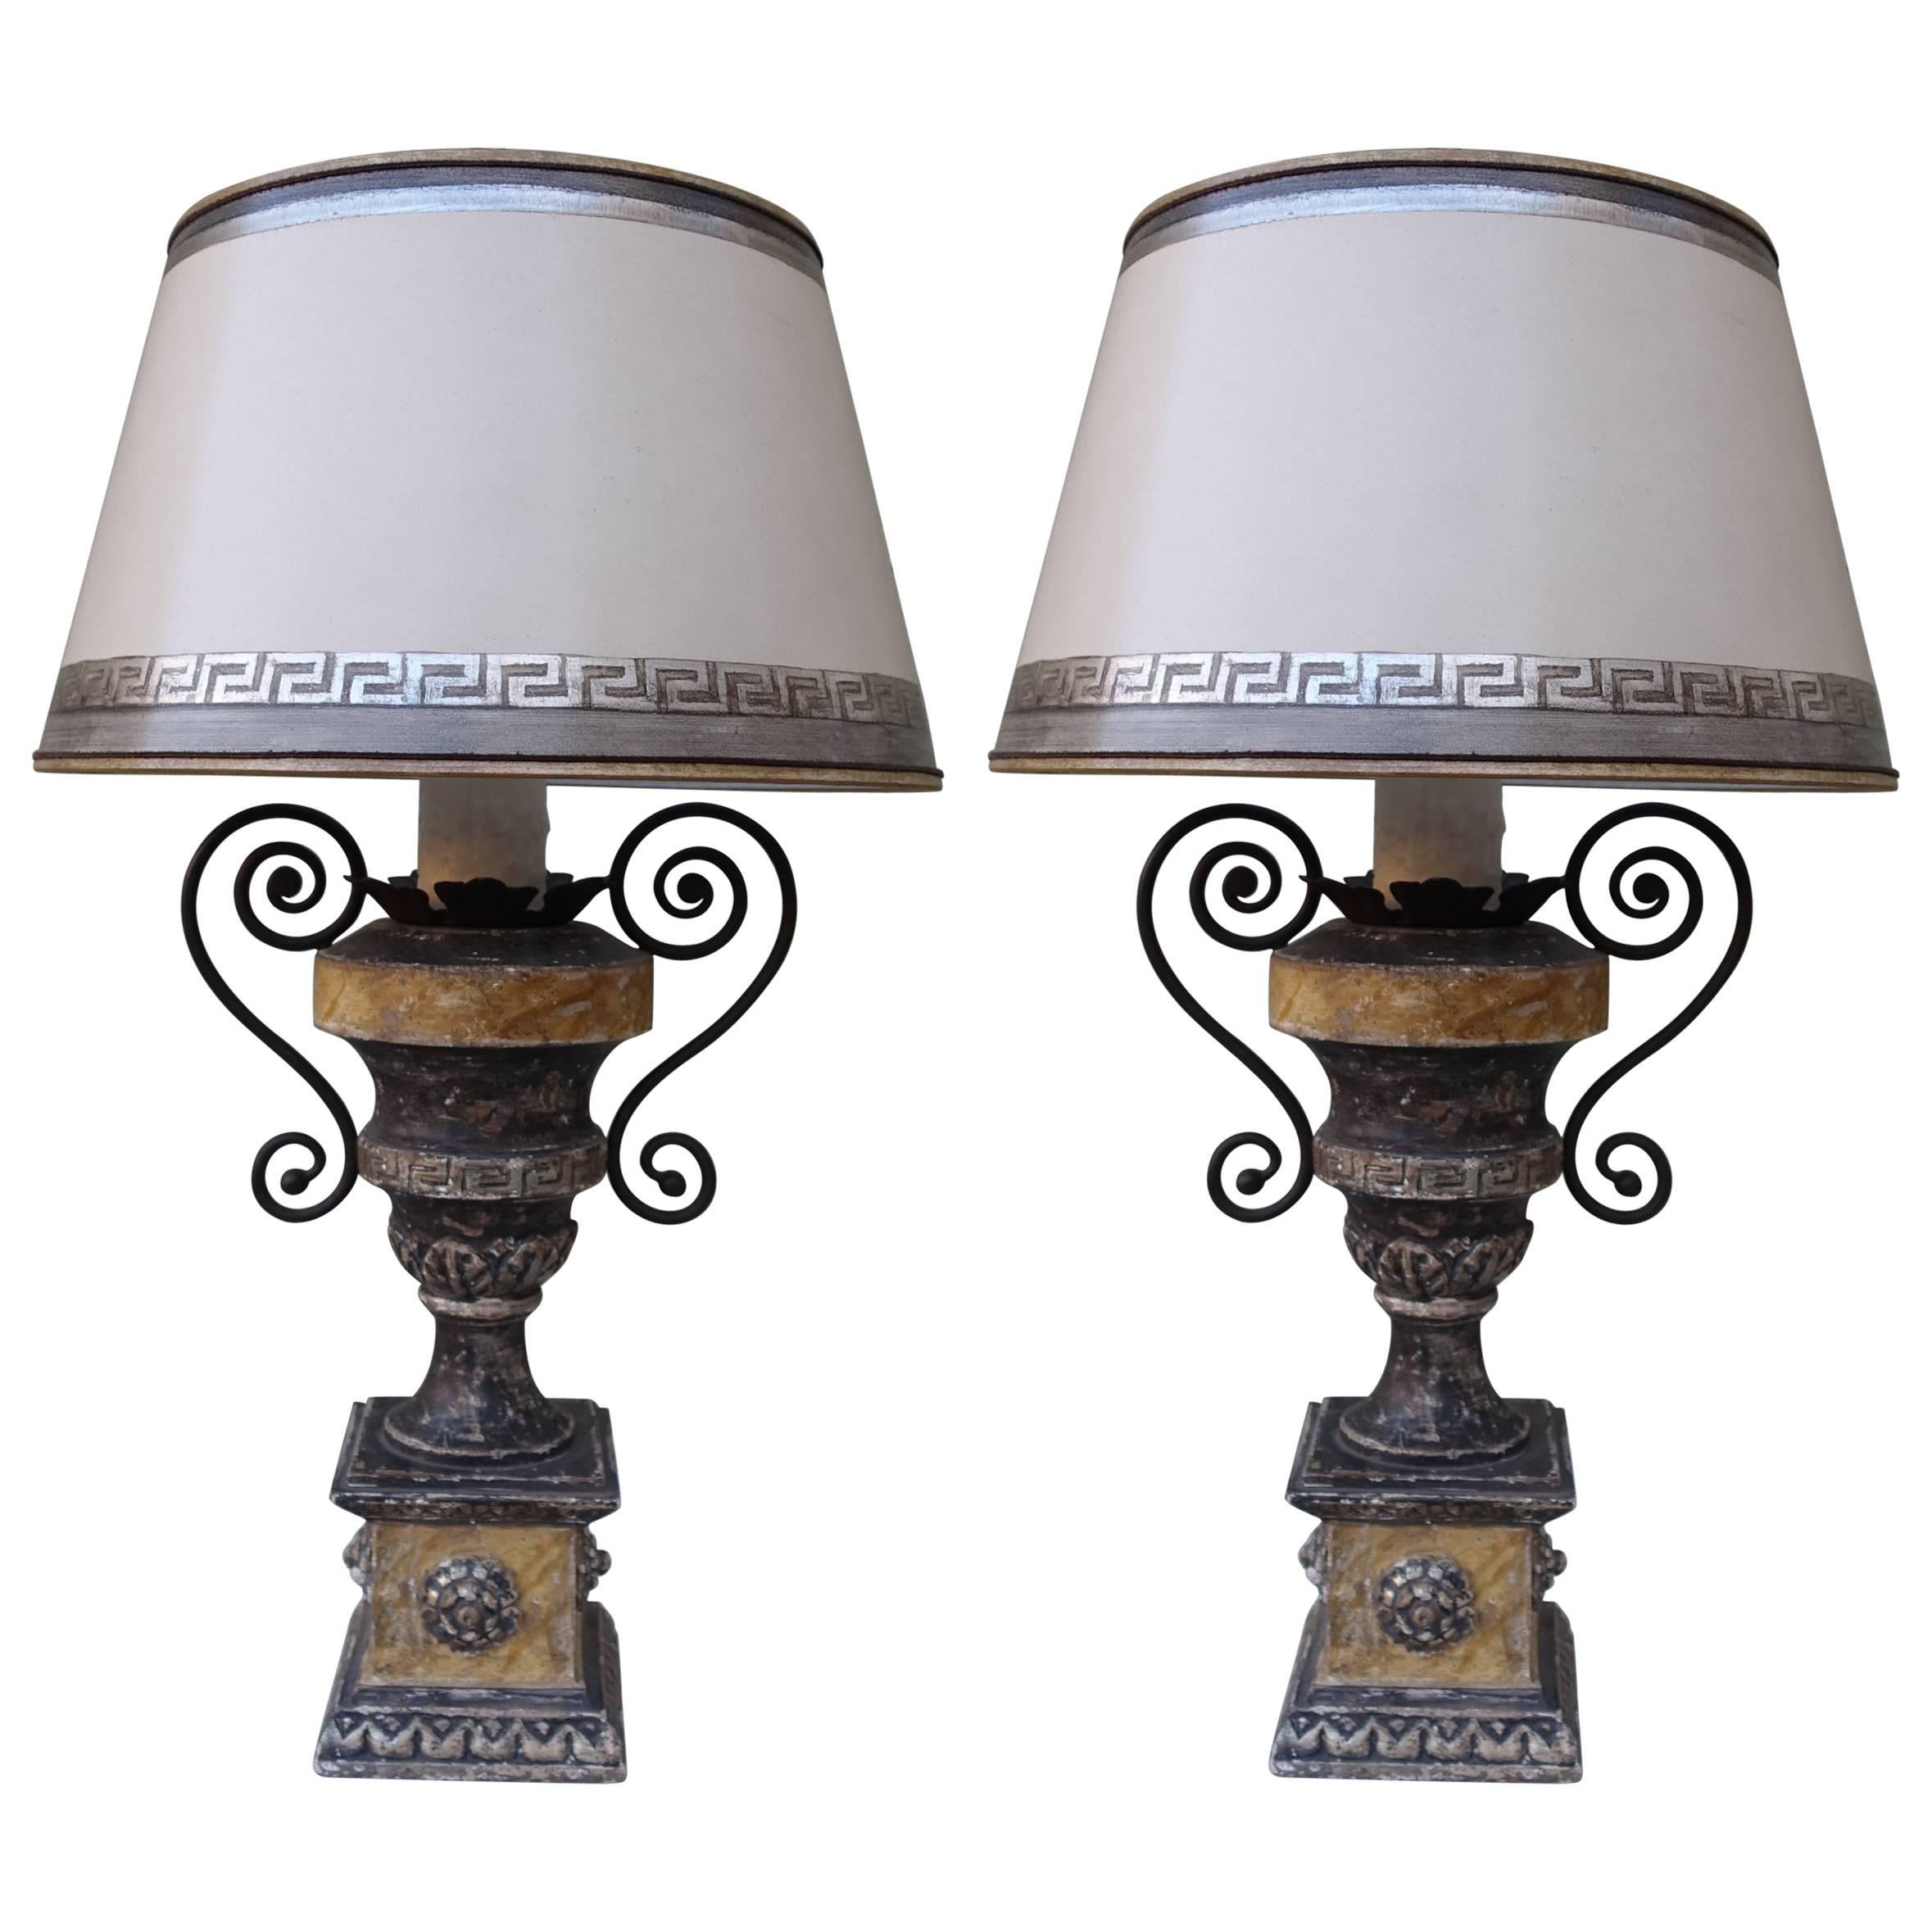 Pair of Neoclassical Style Painted Urn Lamps with Shades